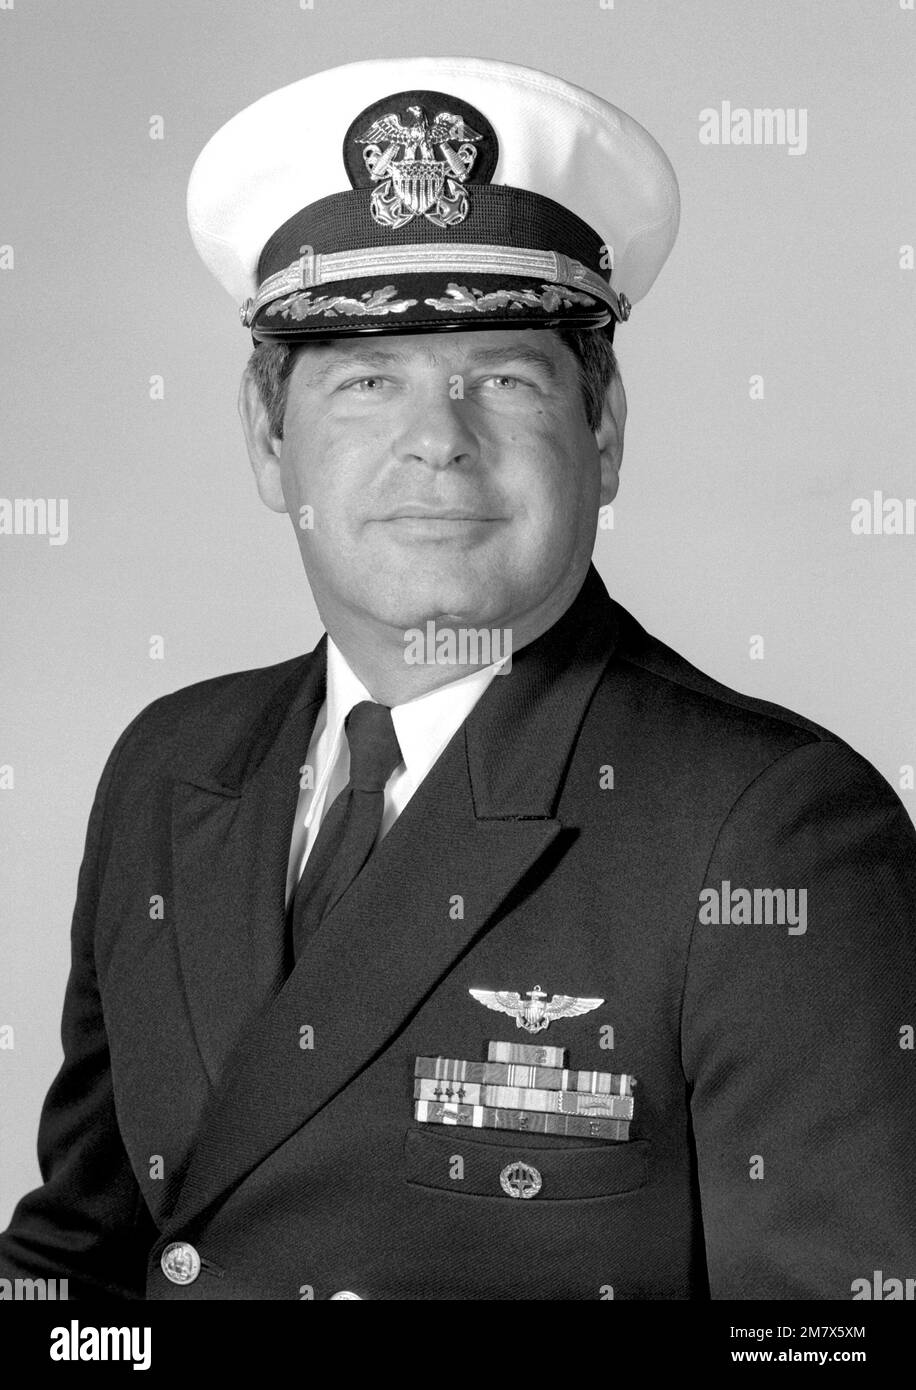 CDR Donald G. Lamm, USN (covered). Country: Unknown Stock Photo